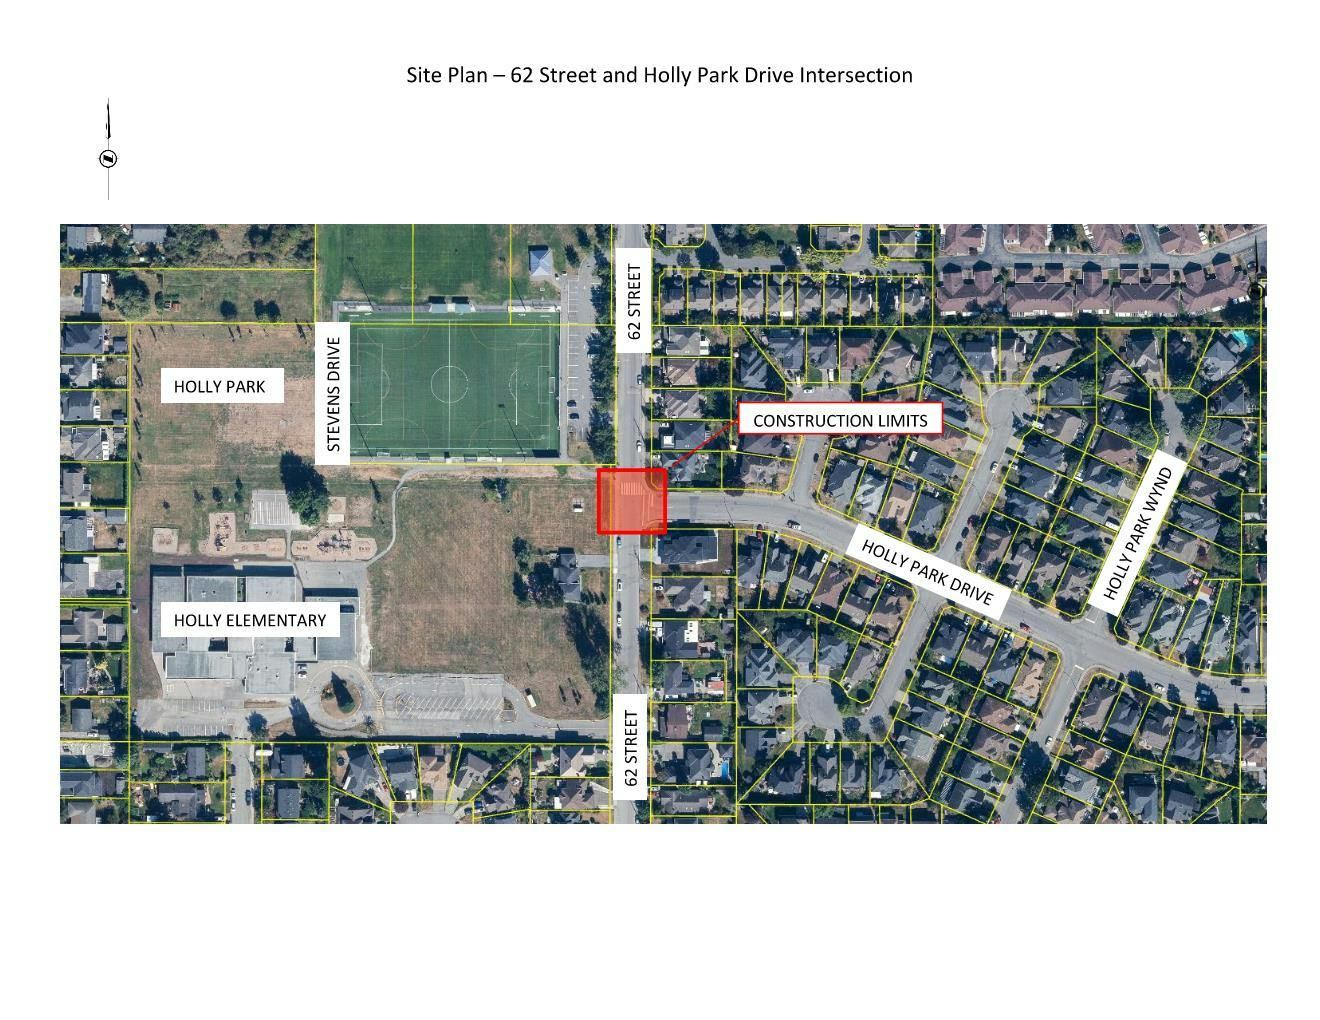 Site Map_62 St and Holly Park Dr.jpg